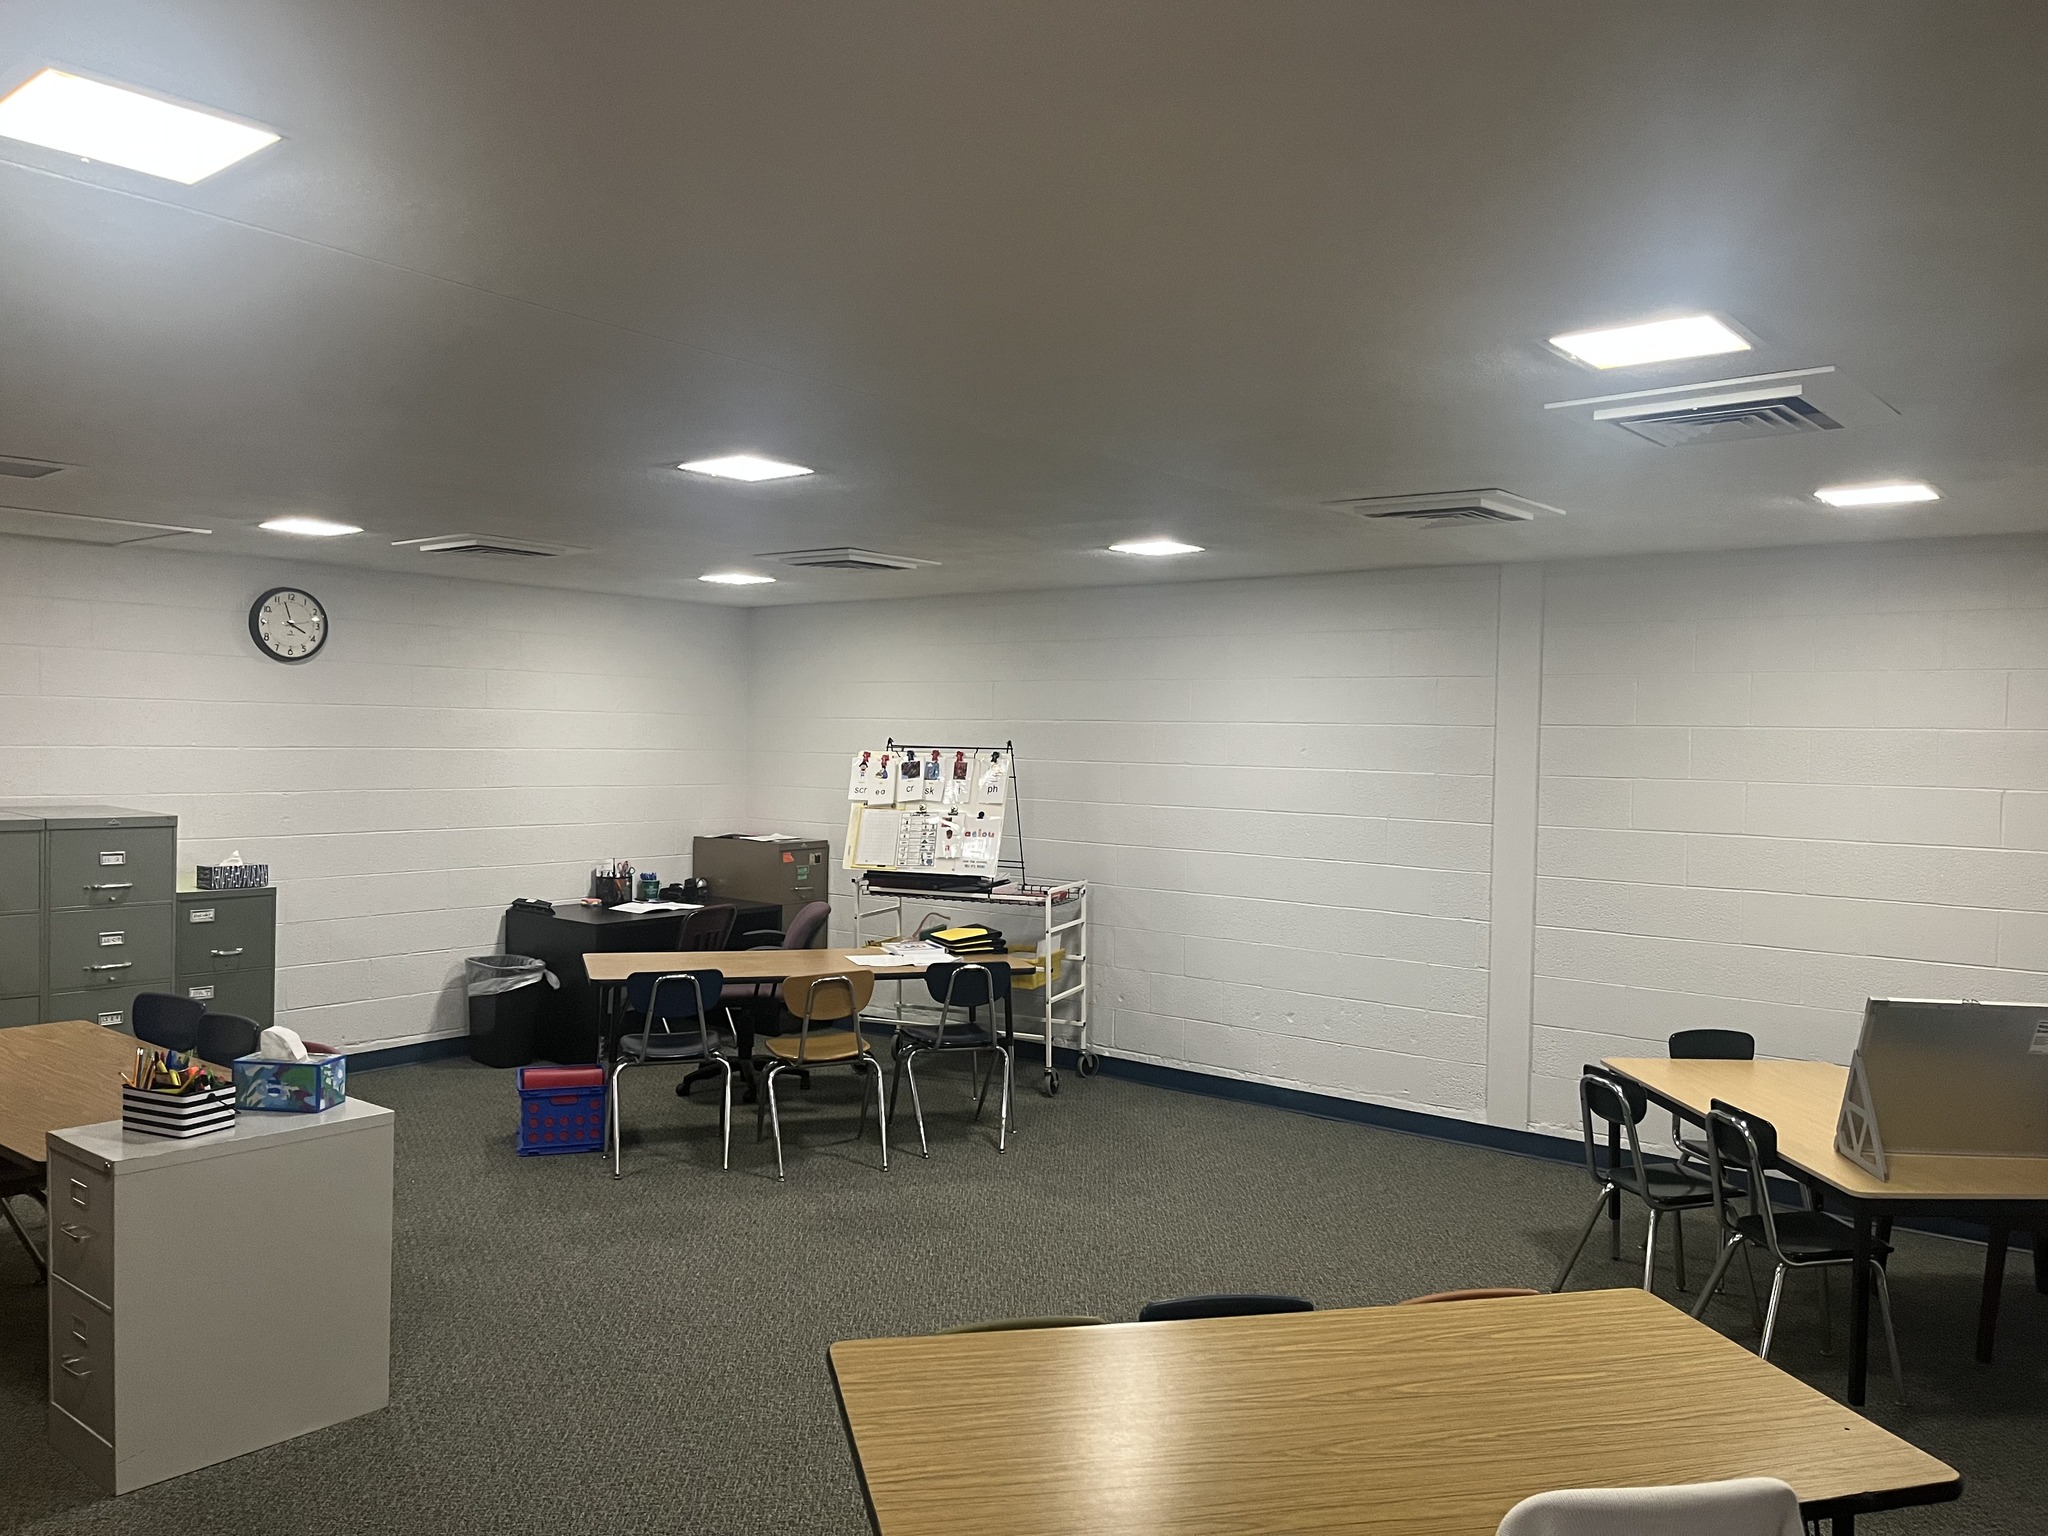 classroom with fresh paint and flooring